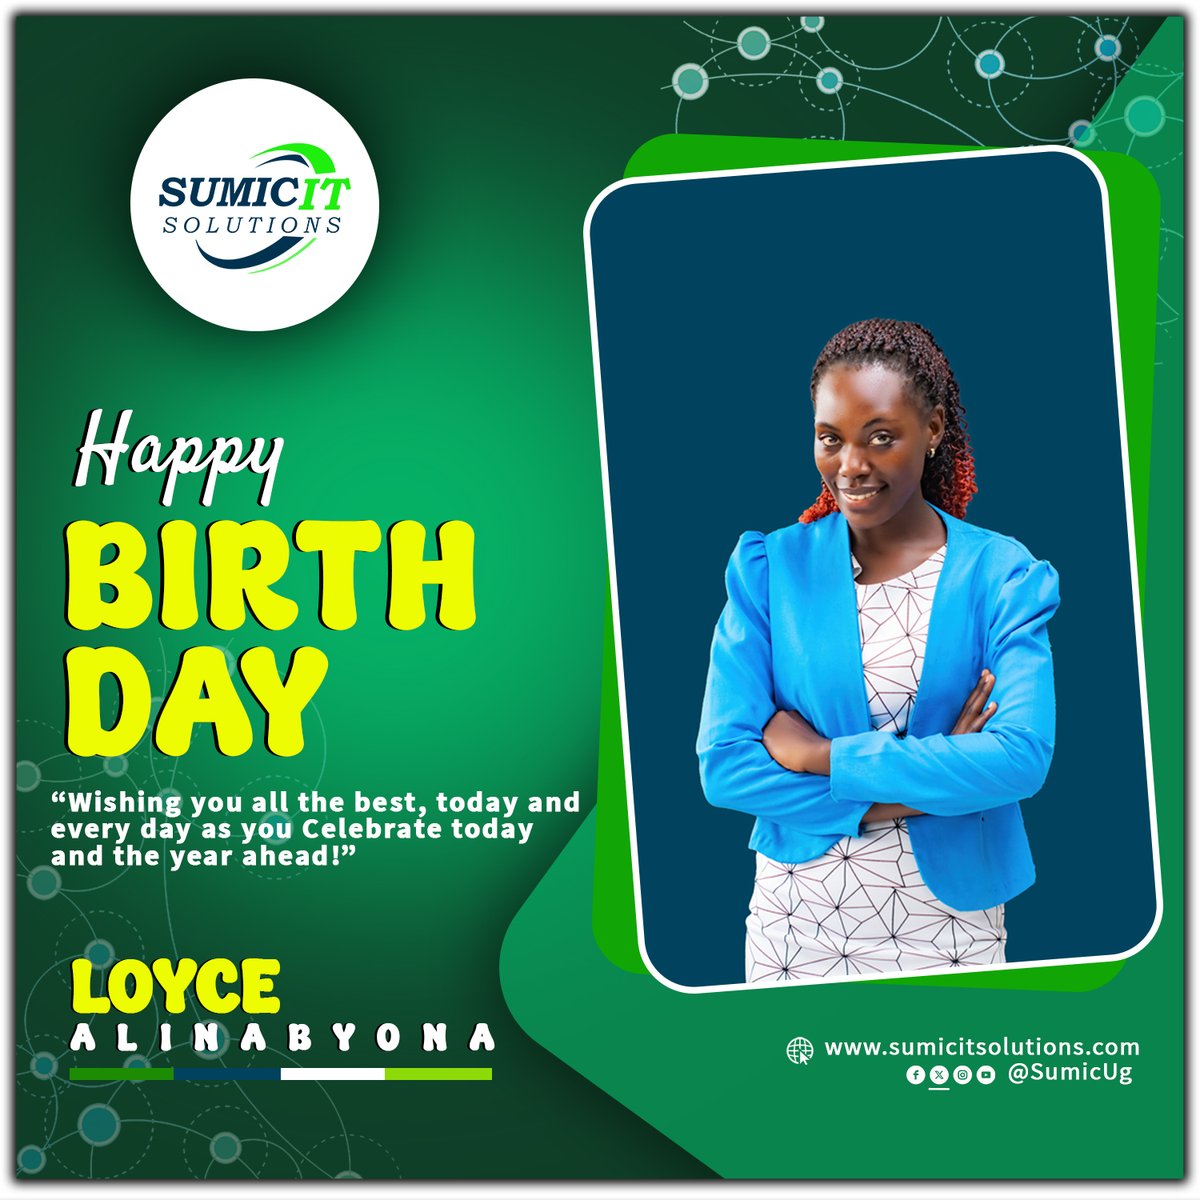 Happy Birthday 🎂 Loyce Alinabyona ~ @alinabyona69087 Wishing you all the best, today and every day, as you celebrate this day. #HappyBirthday